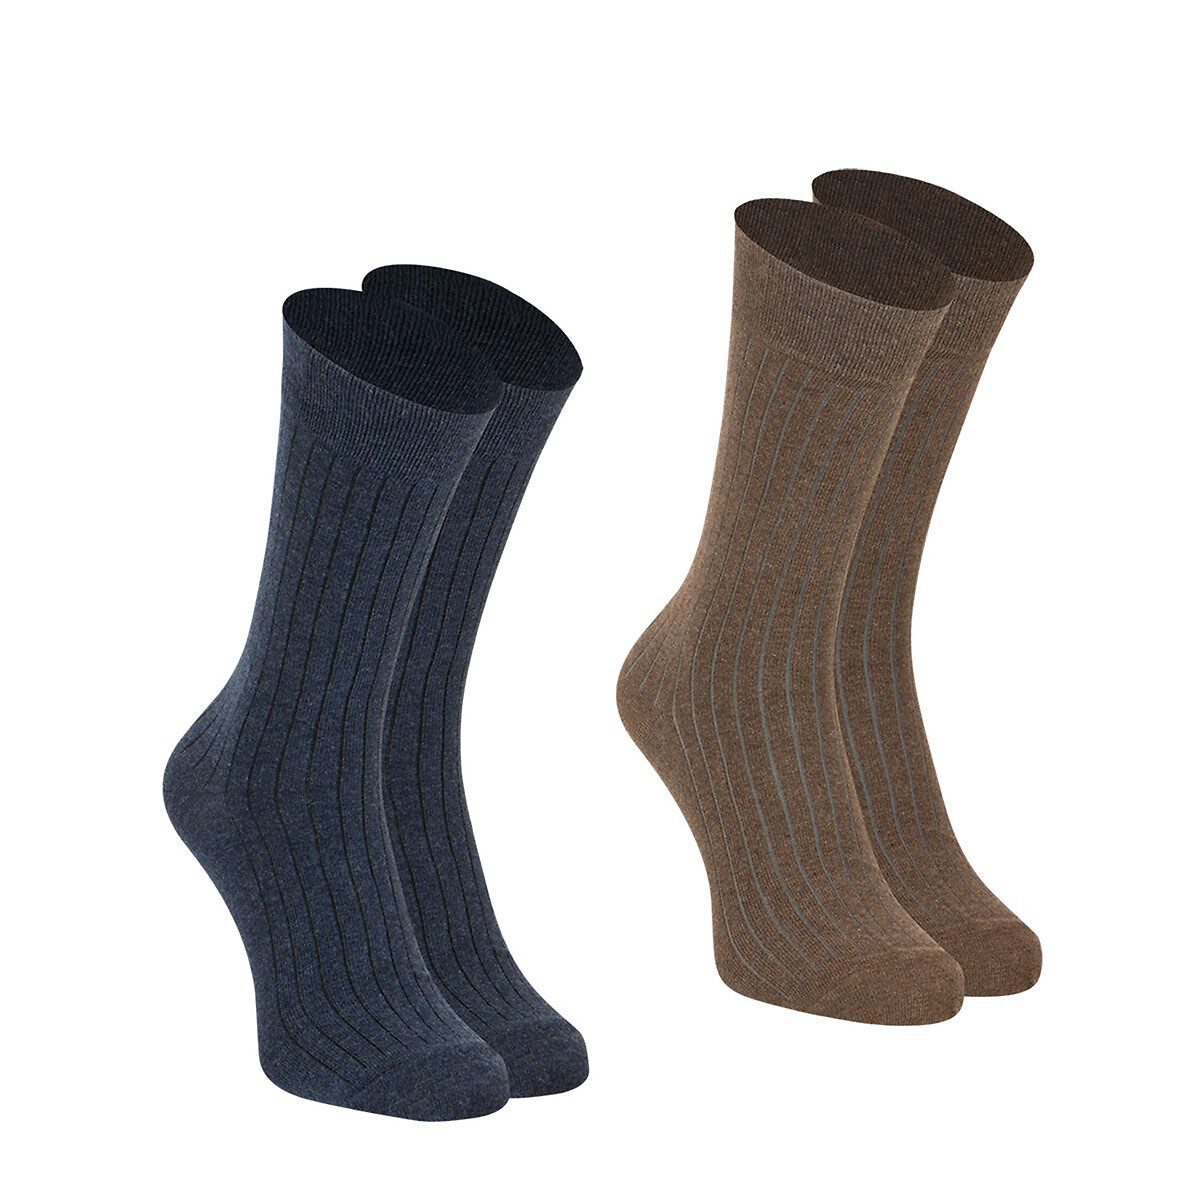 Pack of 2 Pairs of Crew Socks in Cotton Mix